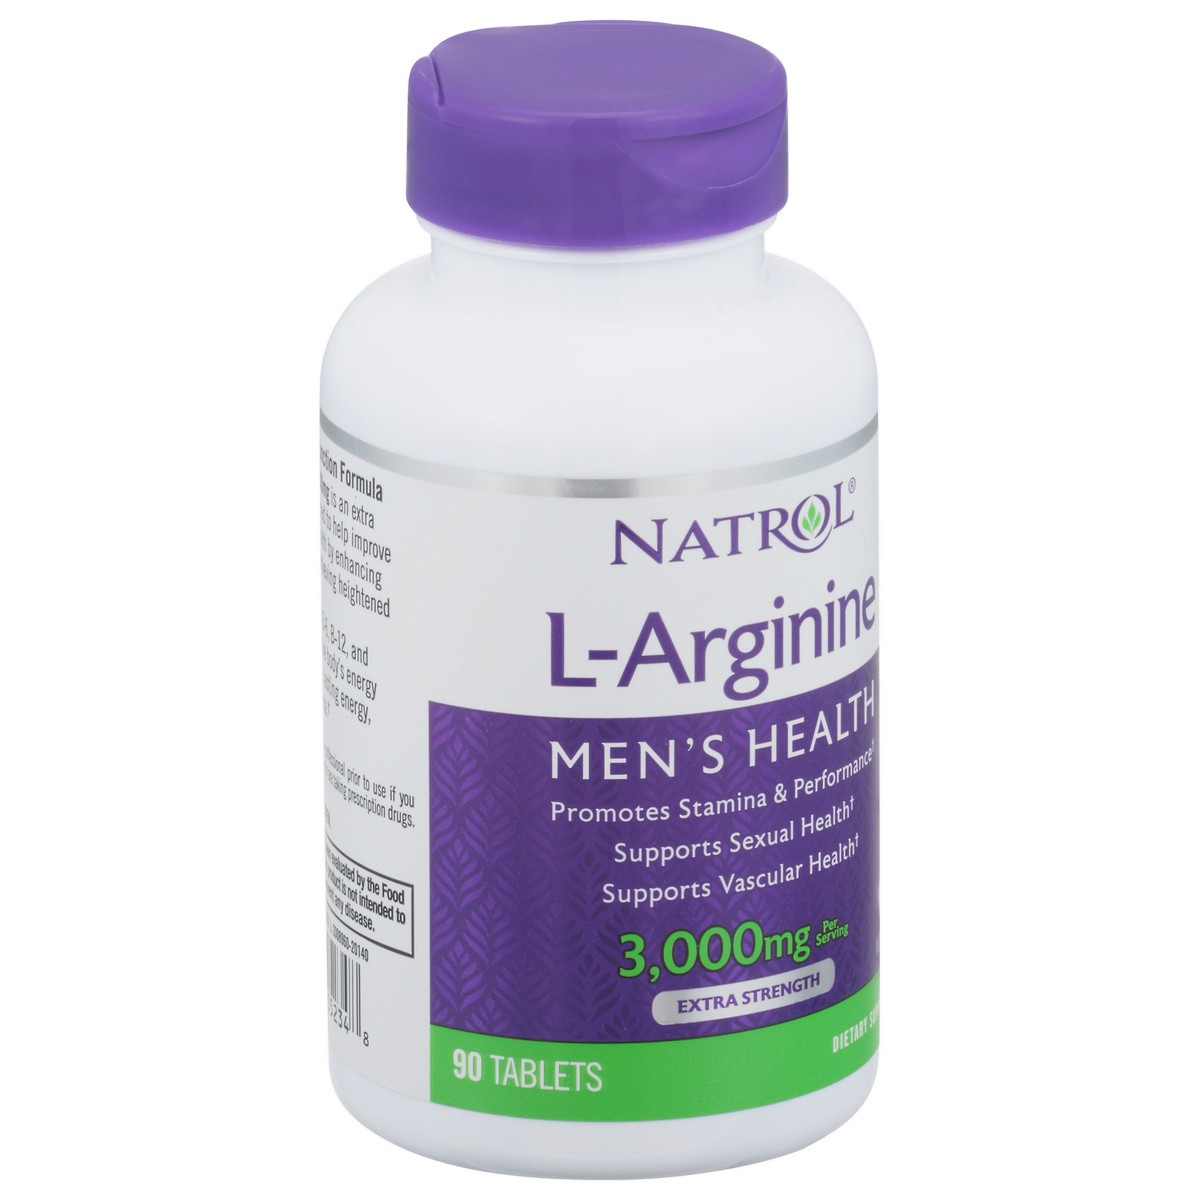 slide 12 of 14, Natrol L-Arginine Tablets, Dietary Supplement Promotes Stamina and Performance, Supports Vascular Health, Contains Nitric Oxide with B Vitamin Complex, Amino Acid, Extra Strength, 3,000mg, 90 Count, 90 ct